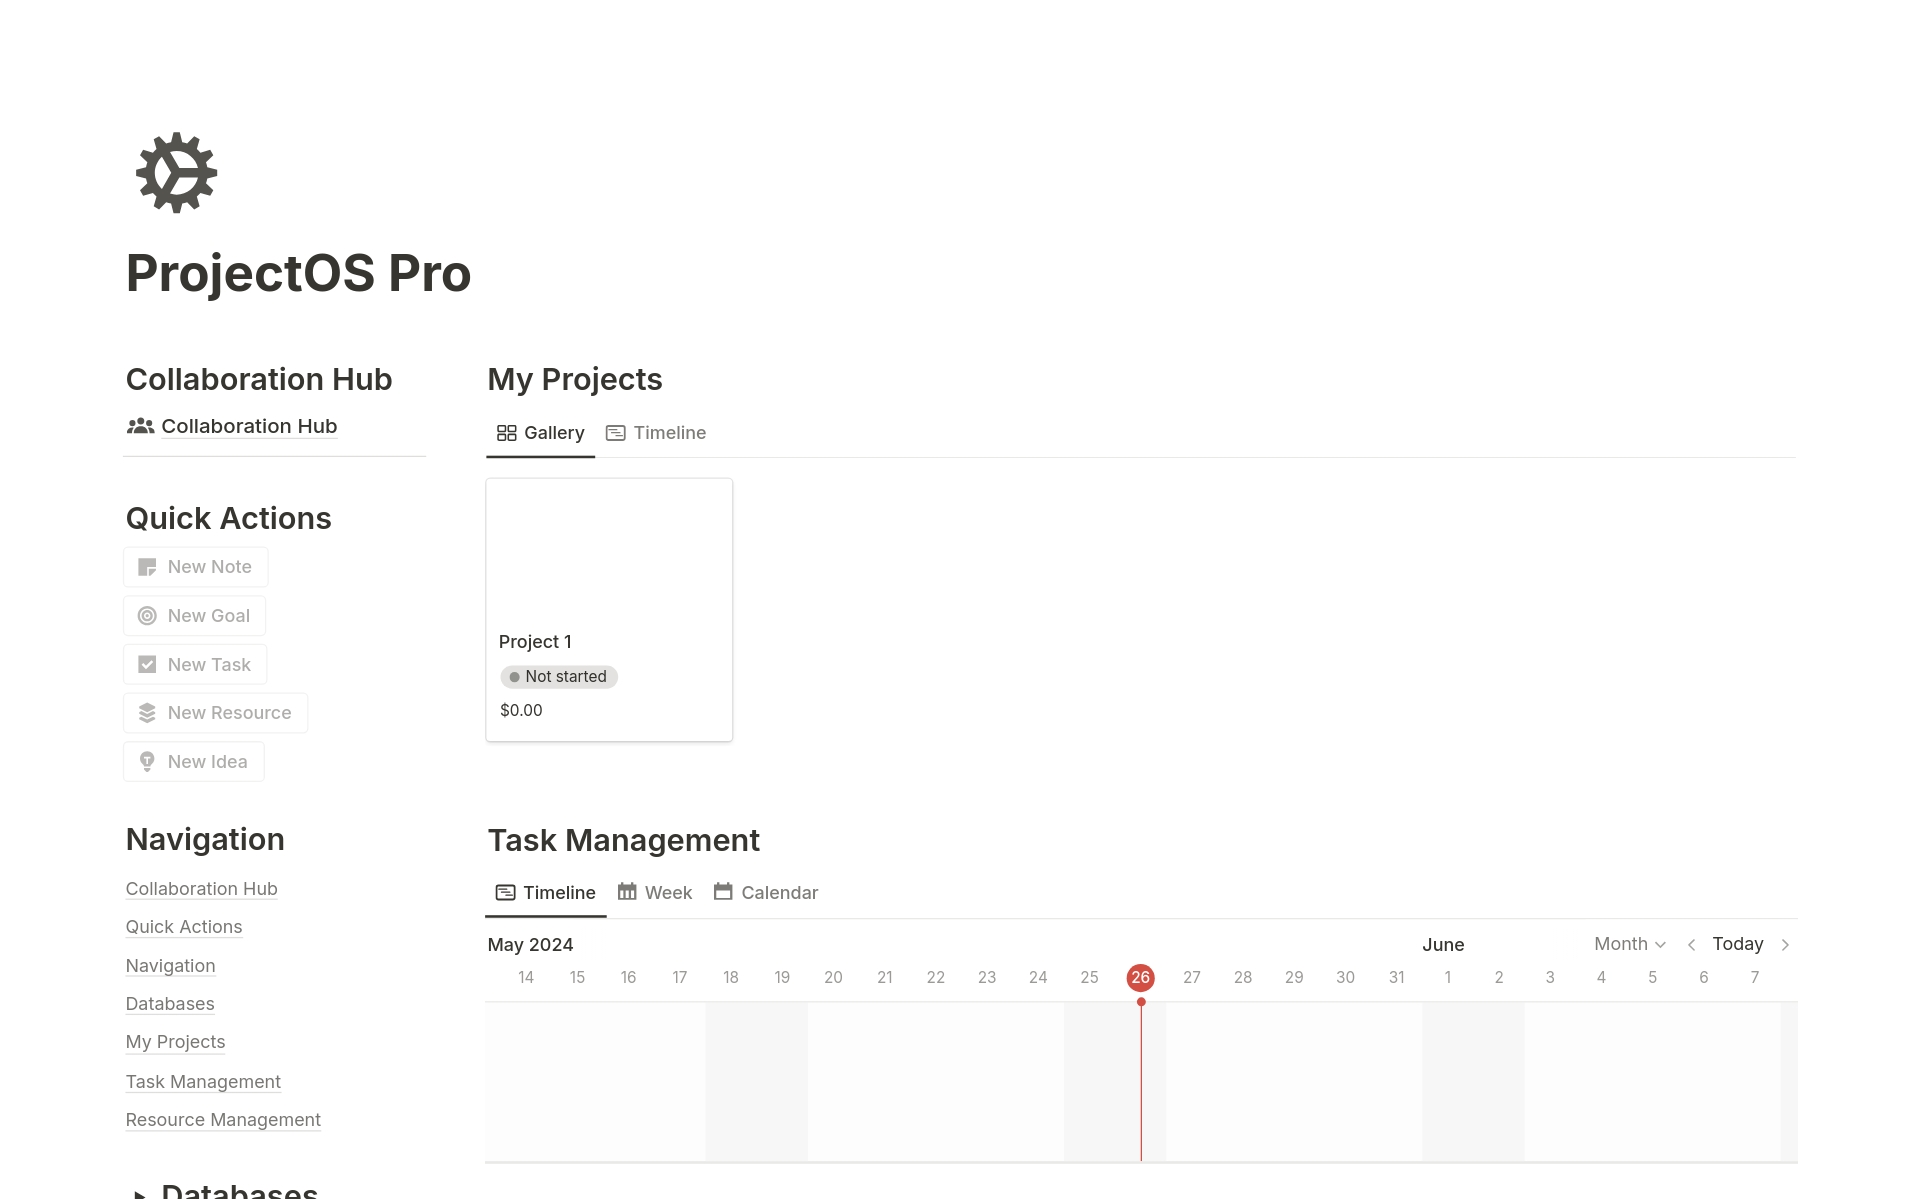 ProjectOS - your ultimate project management and organization tool! 

Whether you're an entrepreneur, team, student, or anyone seeking efficient project management, ProjectOS has the tools you need to organize, track, and manage your projects with ease.